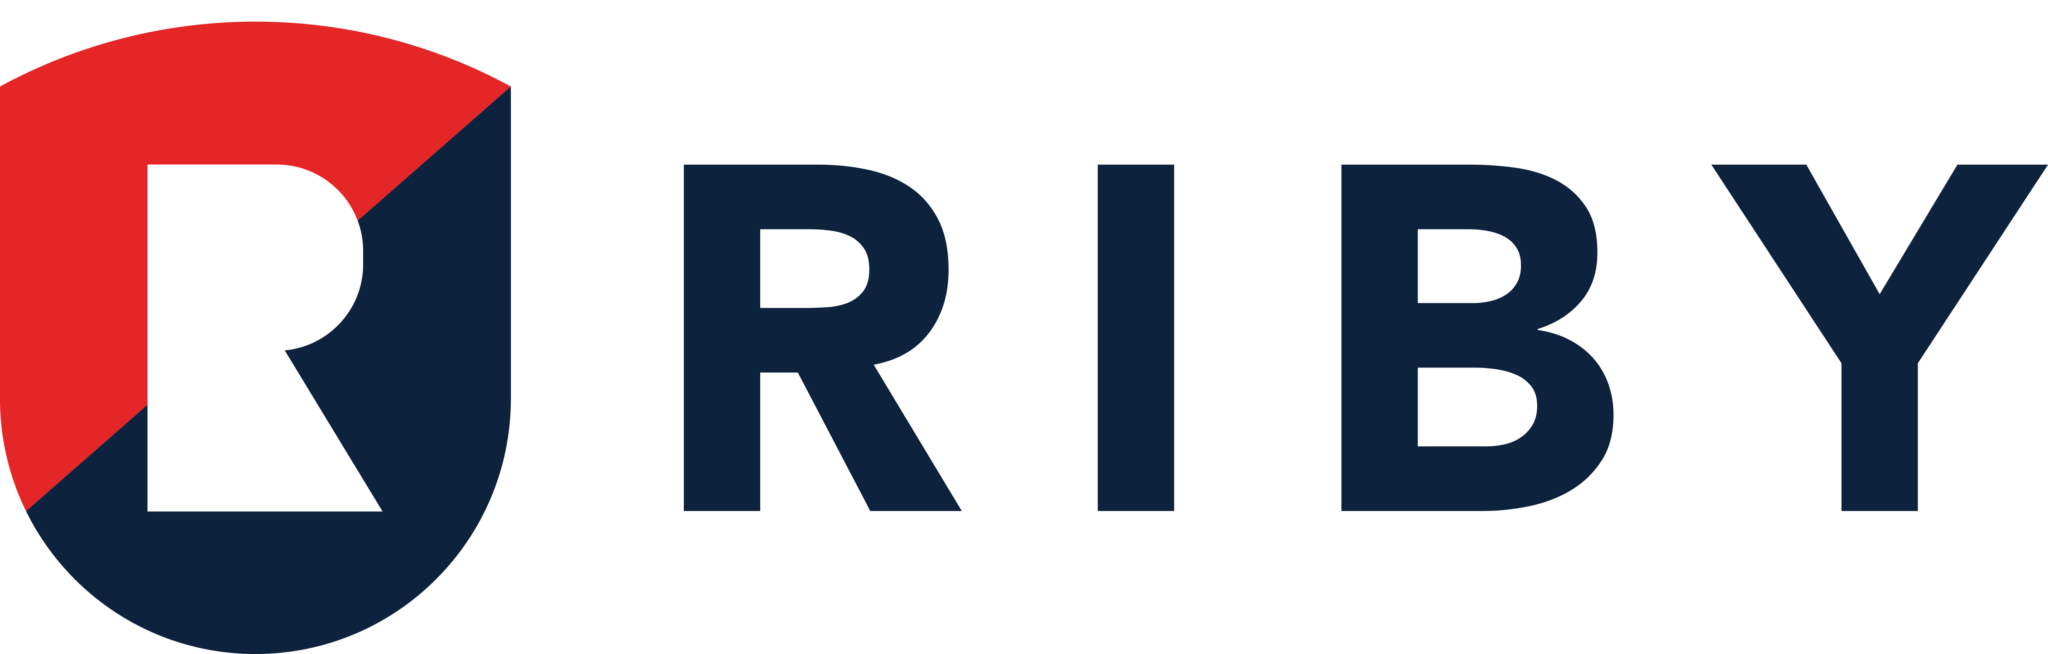 Riby logo.png